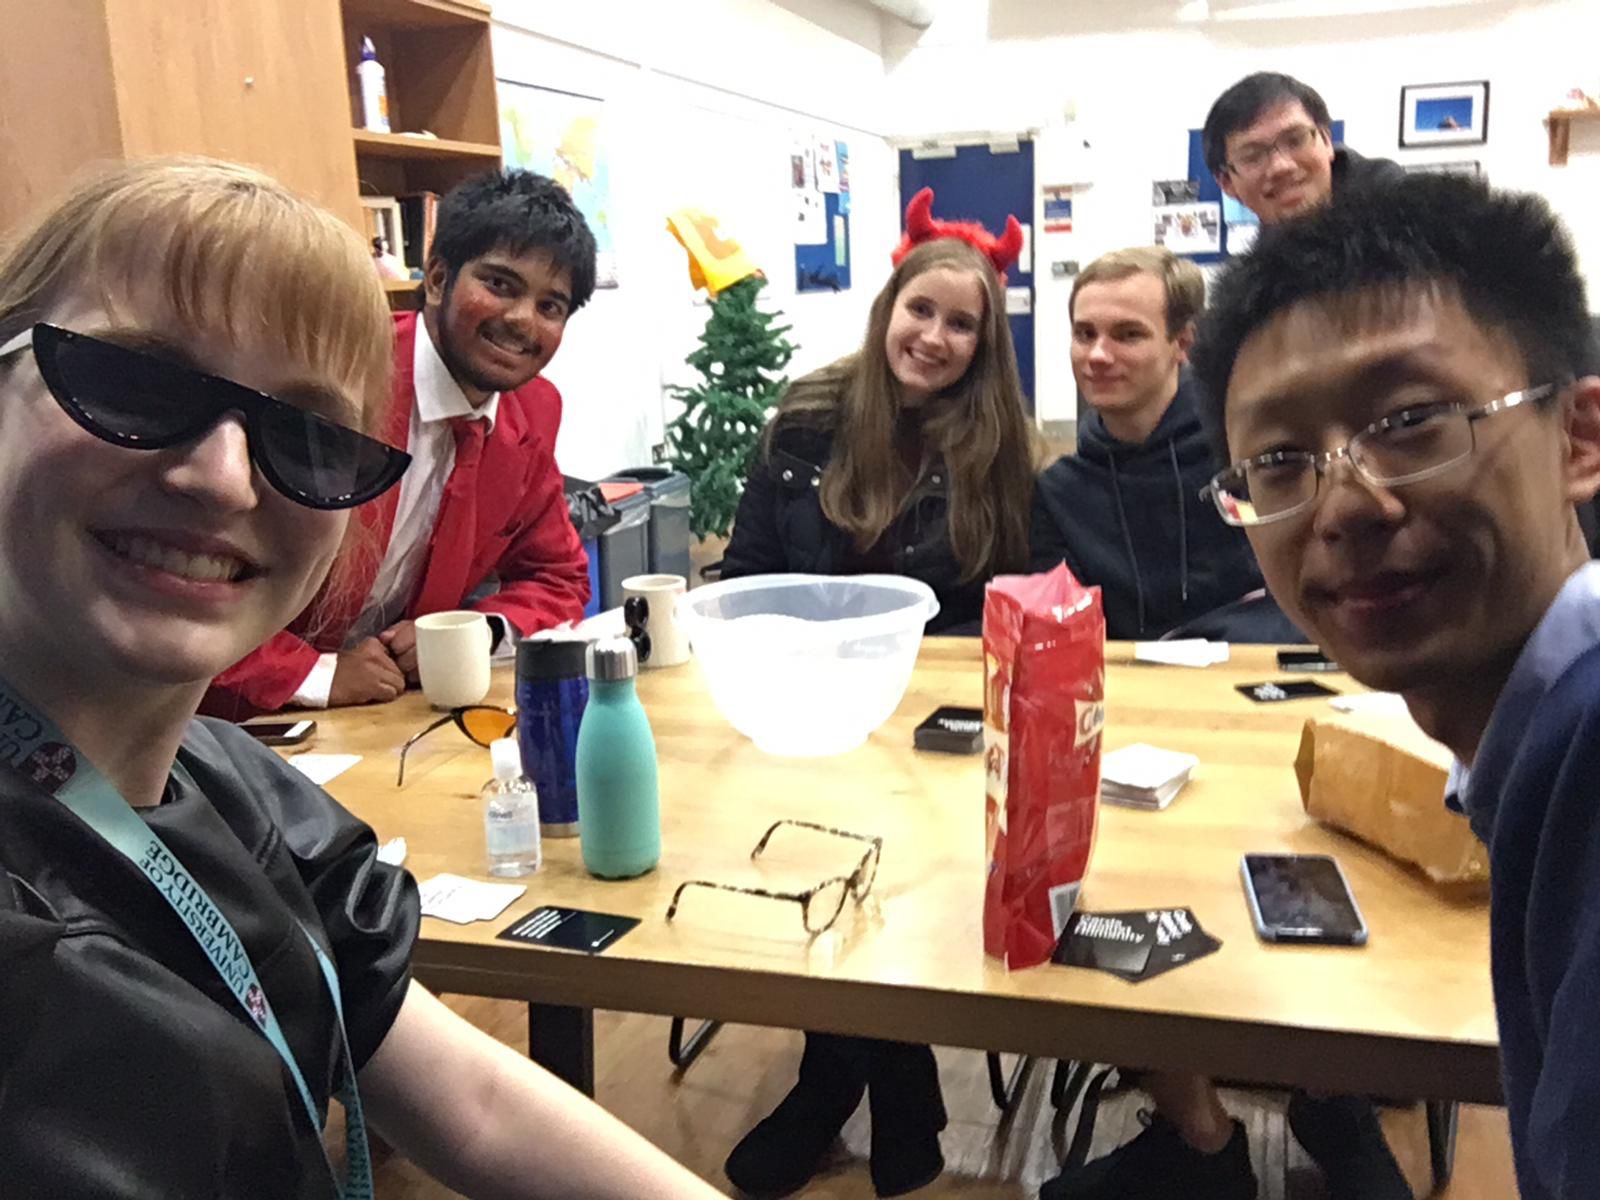 Six students in various levels of fancy dress, sat around a table